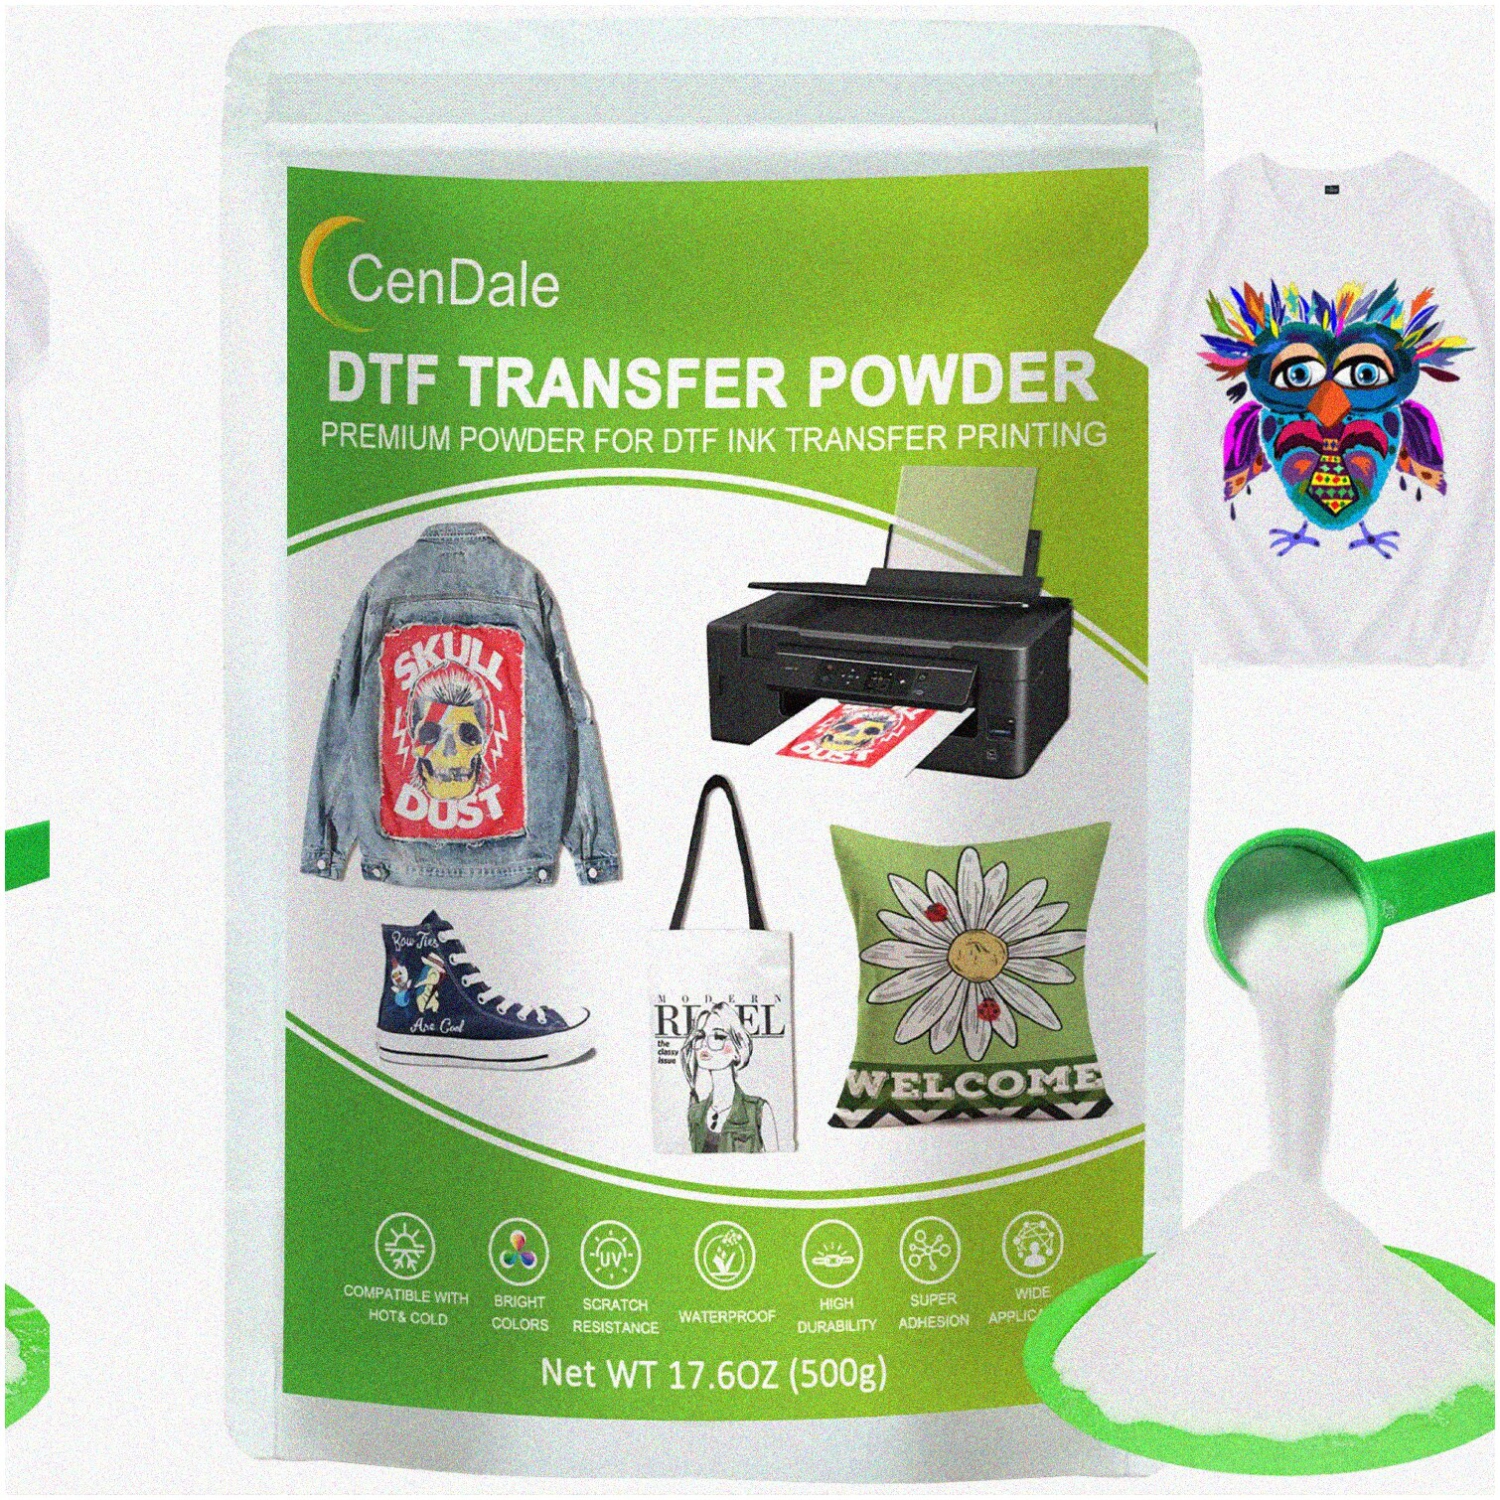 SubliMelt DTF Powder: 500g 17.6oz White Hot Adhesive for Sublimation. Compatible with DTF & DTG Printers. Ideal DTF PreTreat for Fabric, Jeans & Cotton T-Shirts.